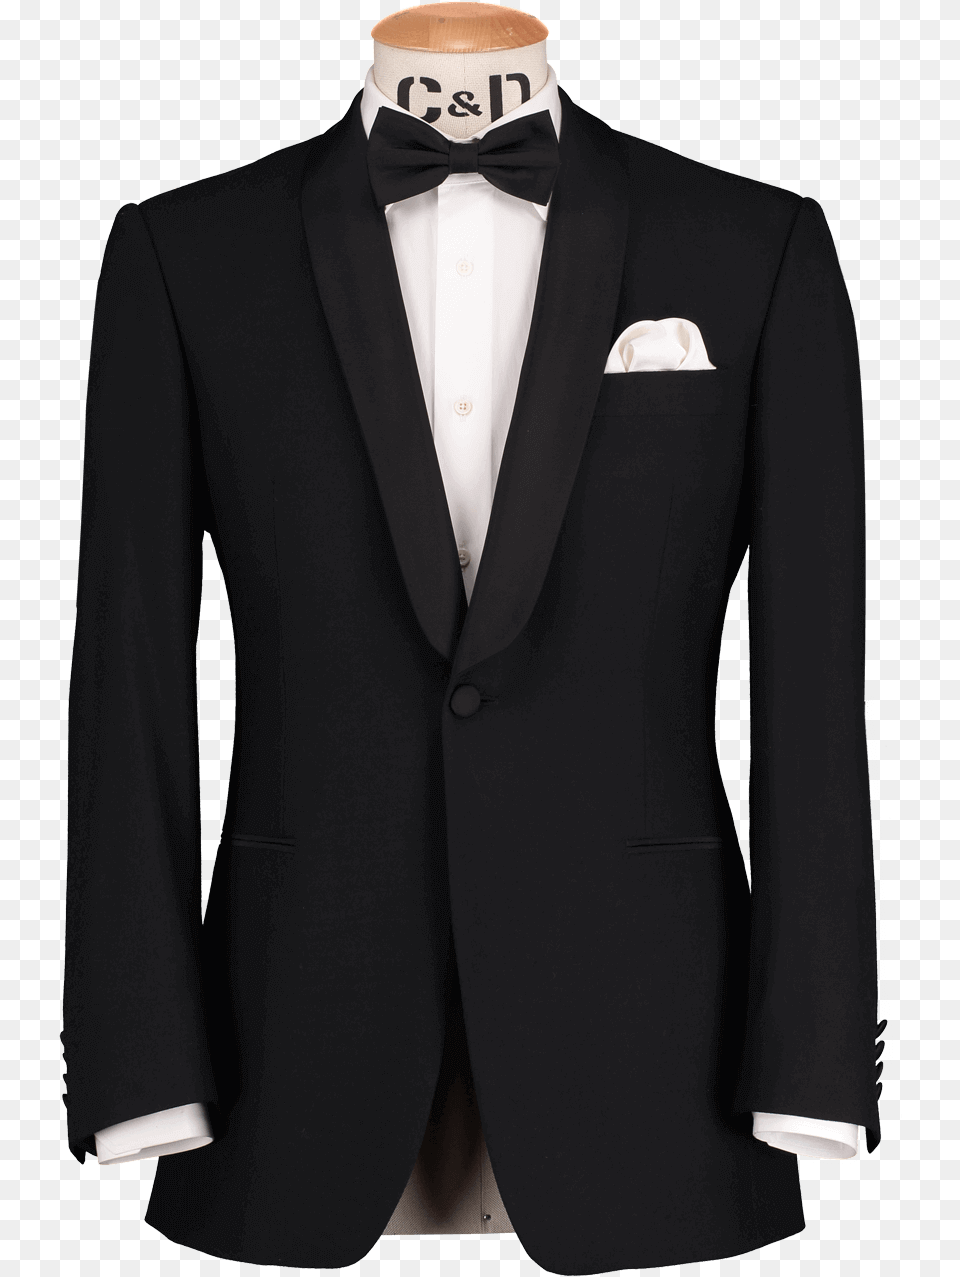 Suit And Tie Tuxedo, Accessories, Clothing, Formal Wear, Coat Free Png Download